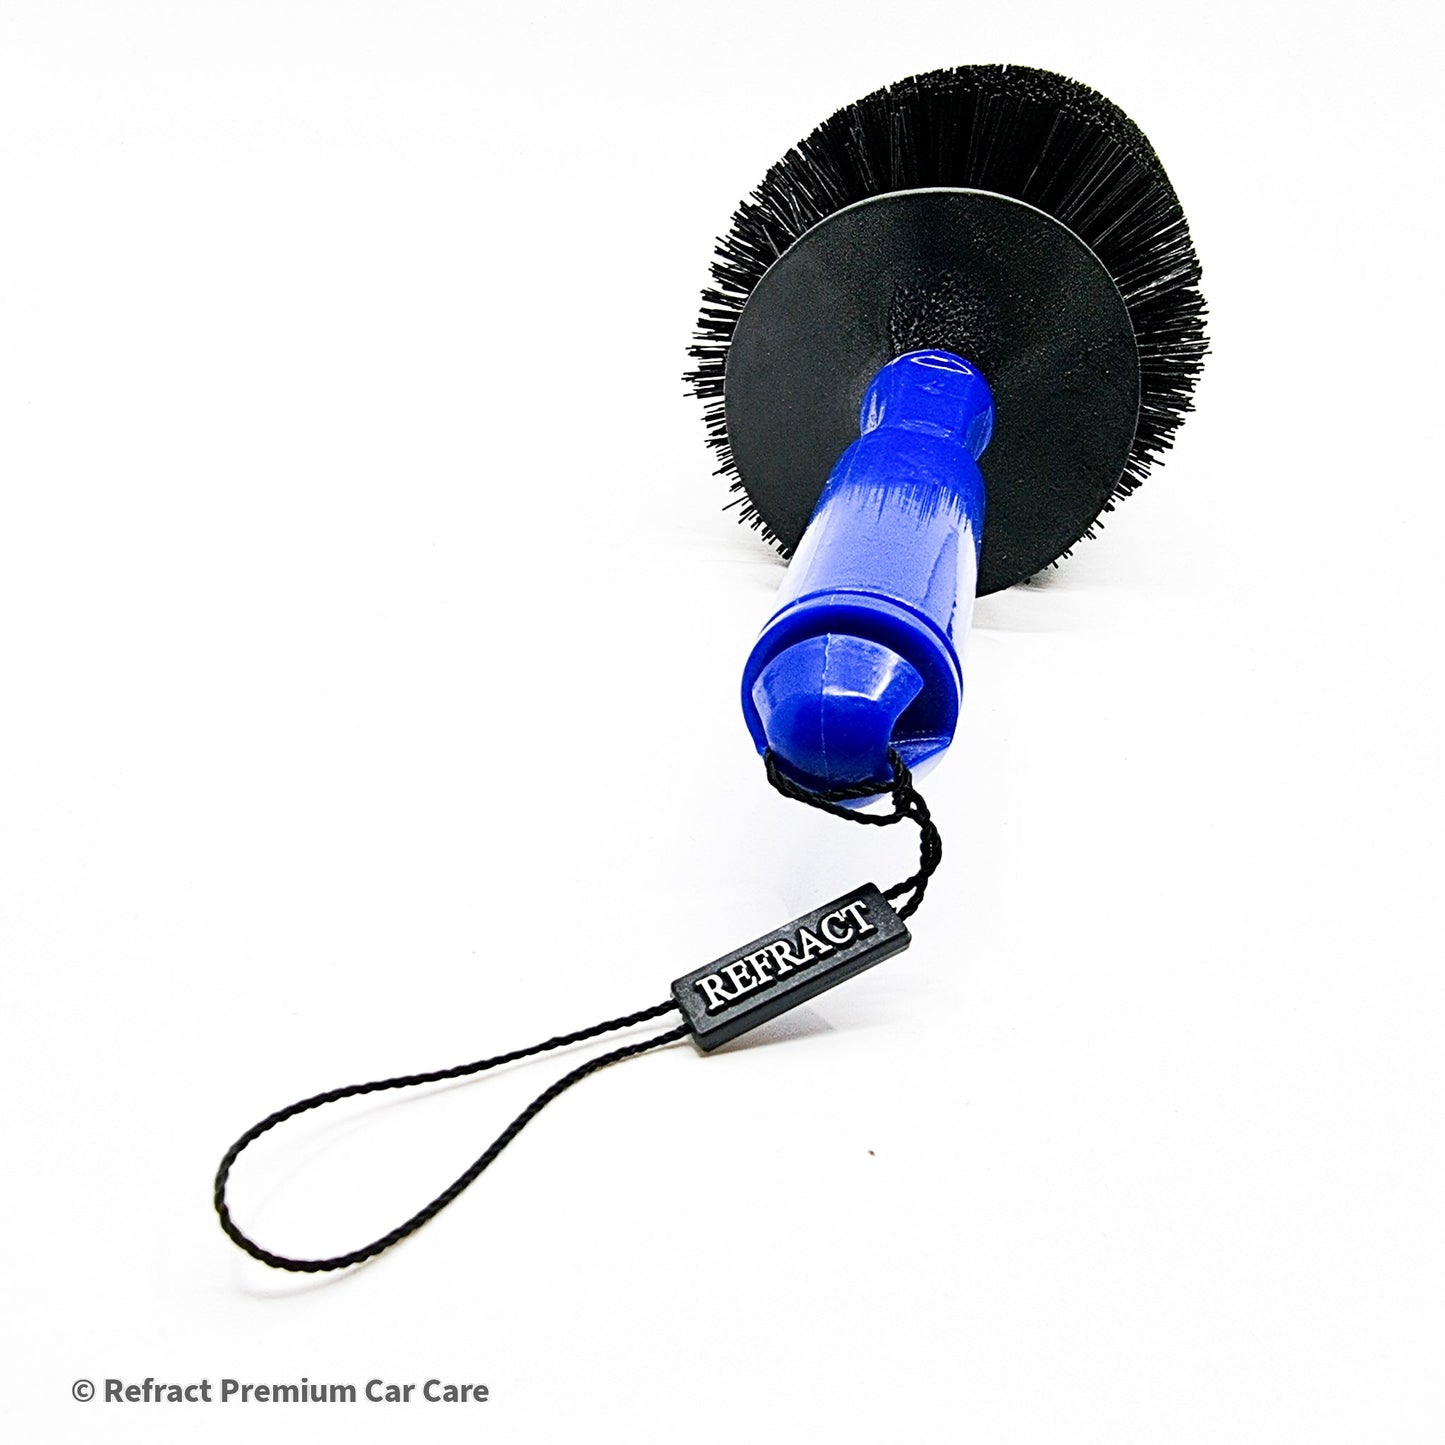 Refract Premium Car Care Products Refract Wheel Cleaning Bristle Brush $9.95